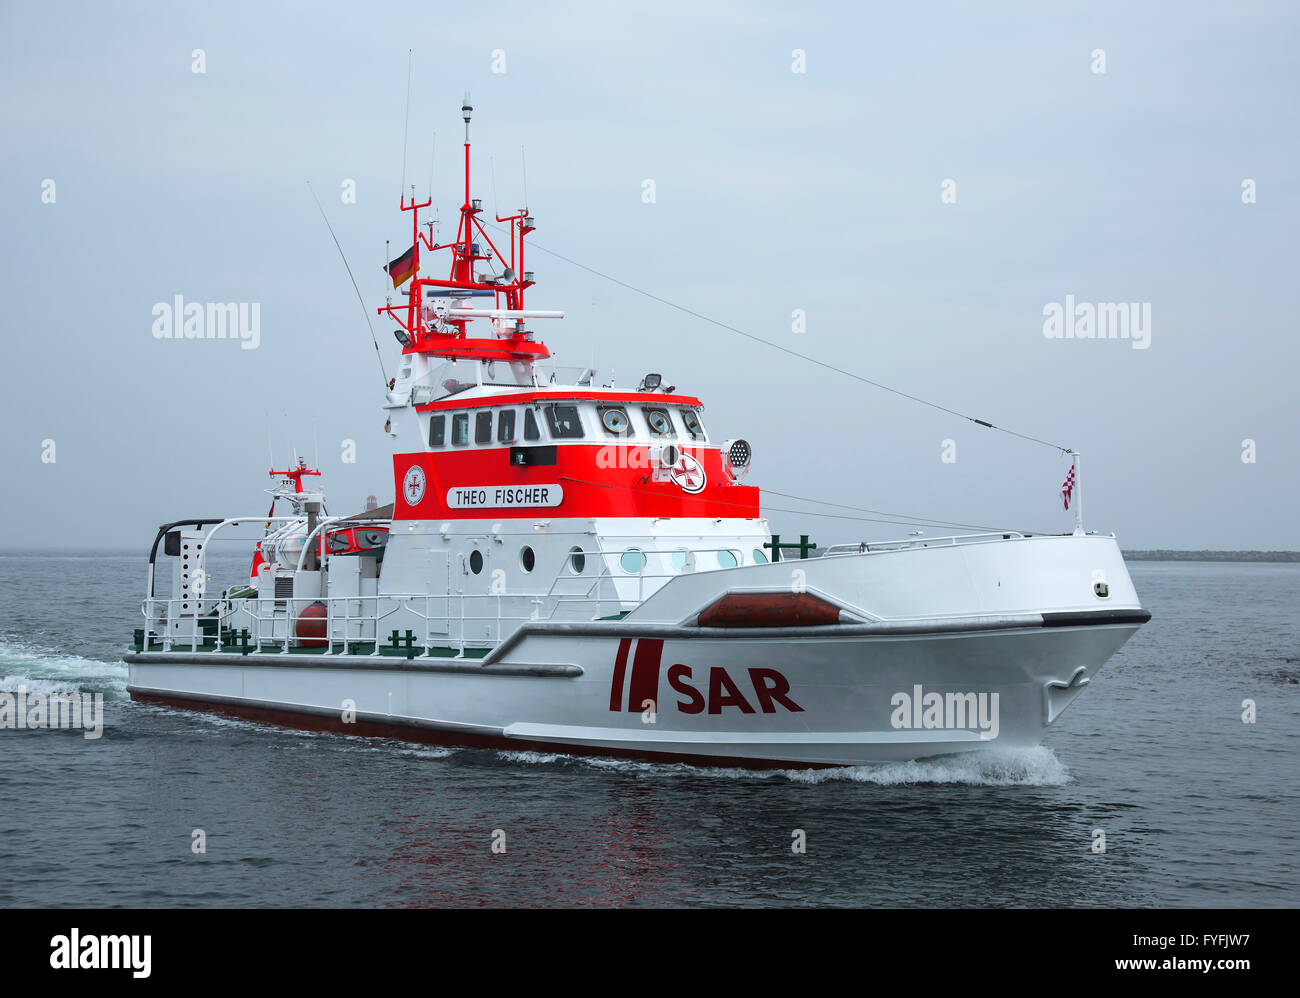 Life boat Theo Fischer, German Maritime Search and Rescue Service, Baltic Sea, Mecklenburg-Western Pomerania, Germany Stock Photo